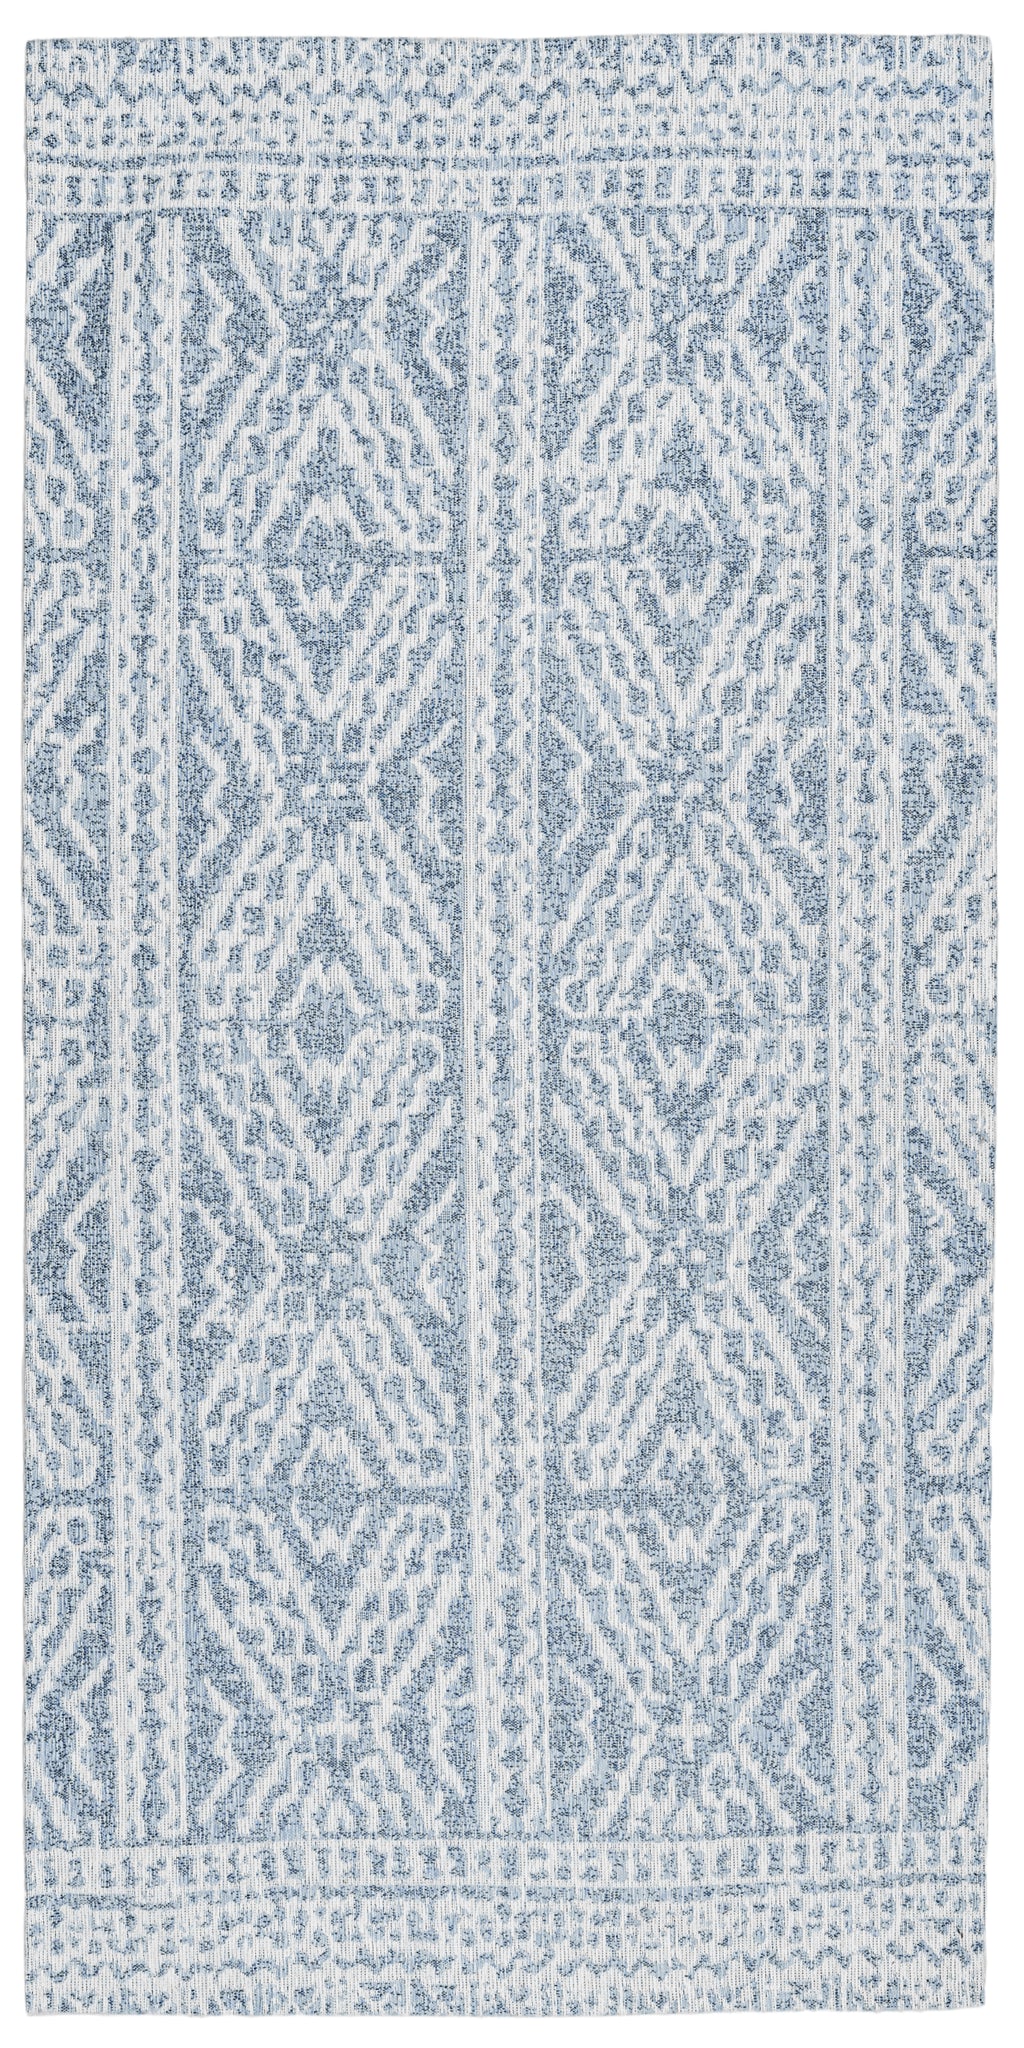 Washable Area rug | The Rugger Lillian | Light Blue & White | 3x7 | By MotherRuggers.com | Machine Washable | Jacquard Woven | Pet Friendly | Kid Friendly | Machine Wash | Line Dry | Living Room | Kitchen | Bedroom | High-Traffic | Anti-Slip | Three-year warranty with proper care | Shake or light Vacuum | Machine Wash as needed | Dry Flat or Line Dry | Dries fast